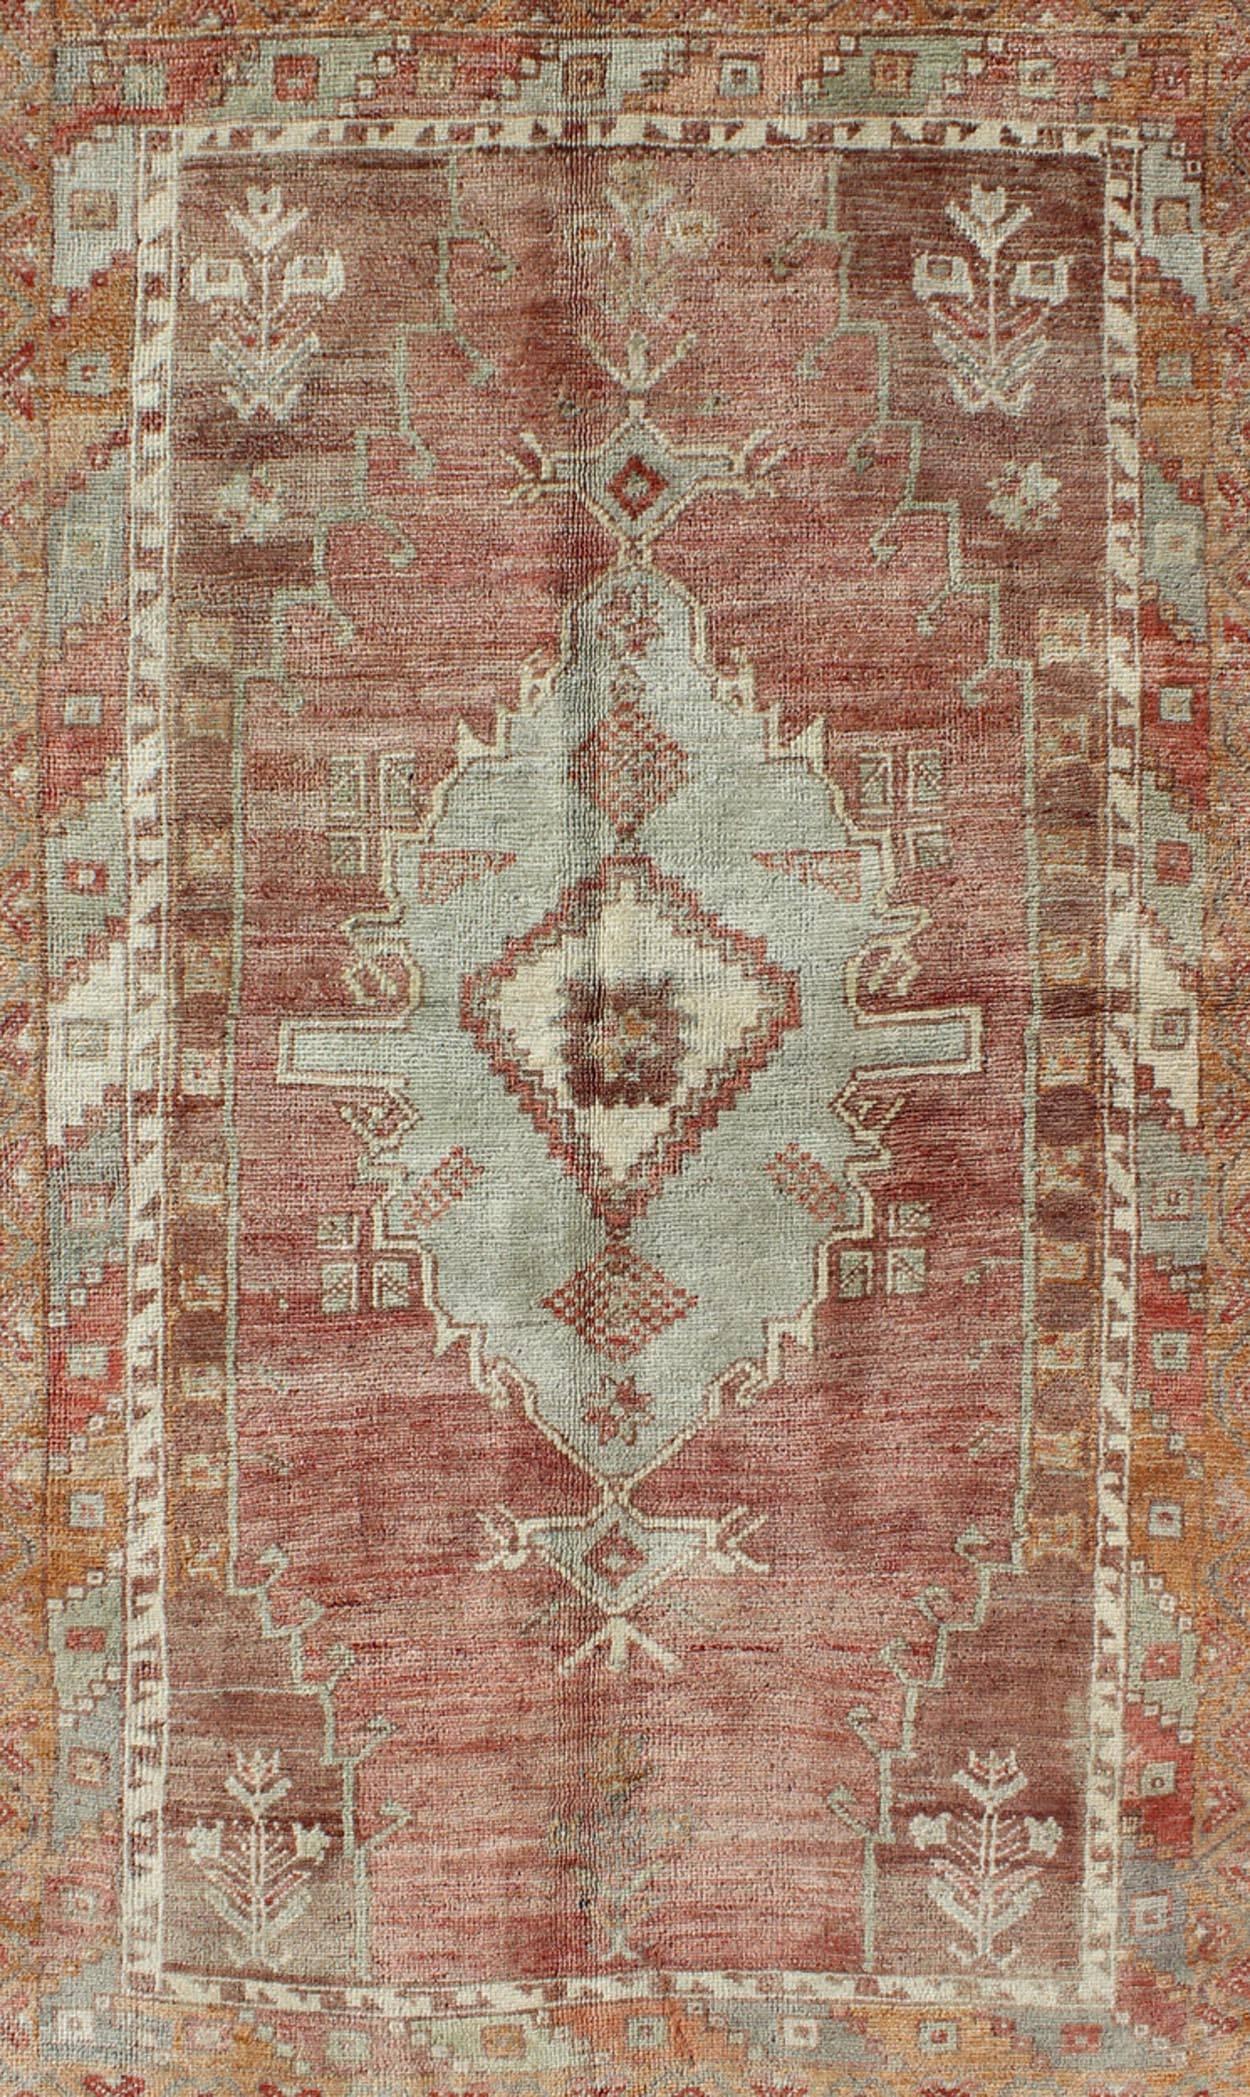 Hand-Knotted Colorful Tribal Vintage Turkish Oushak Rug with Central Medallion Design